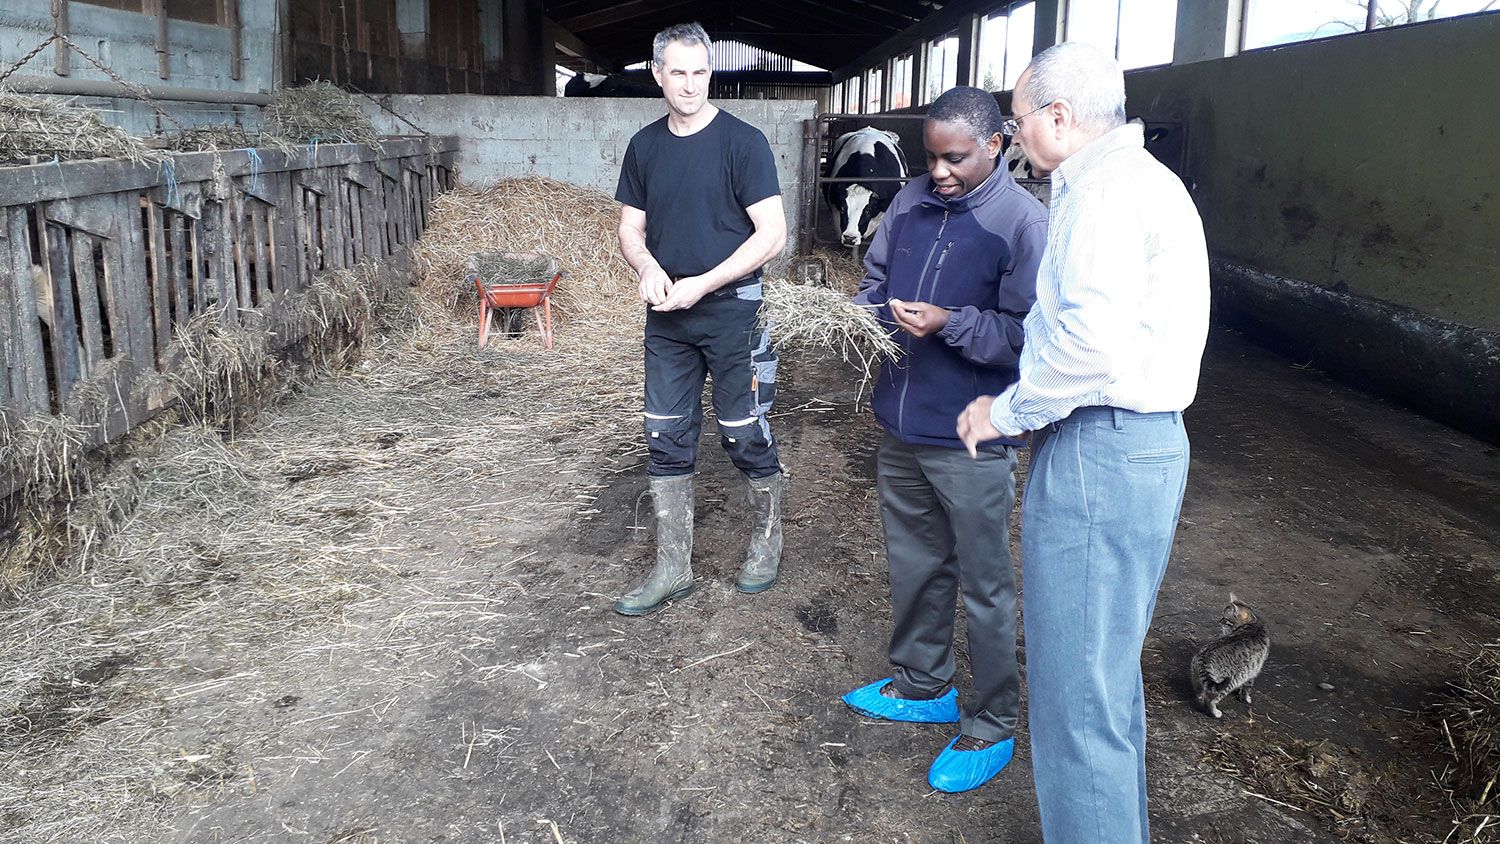 Three men standing together in a barn